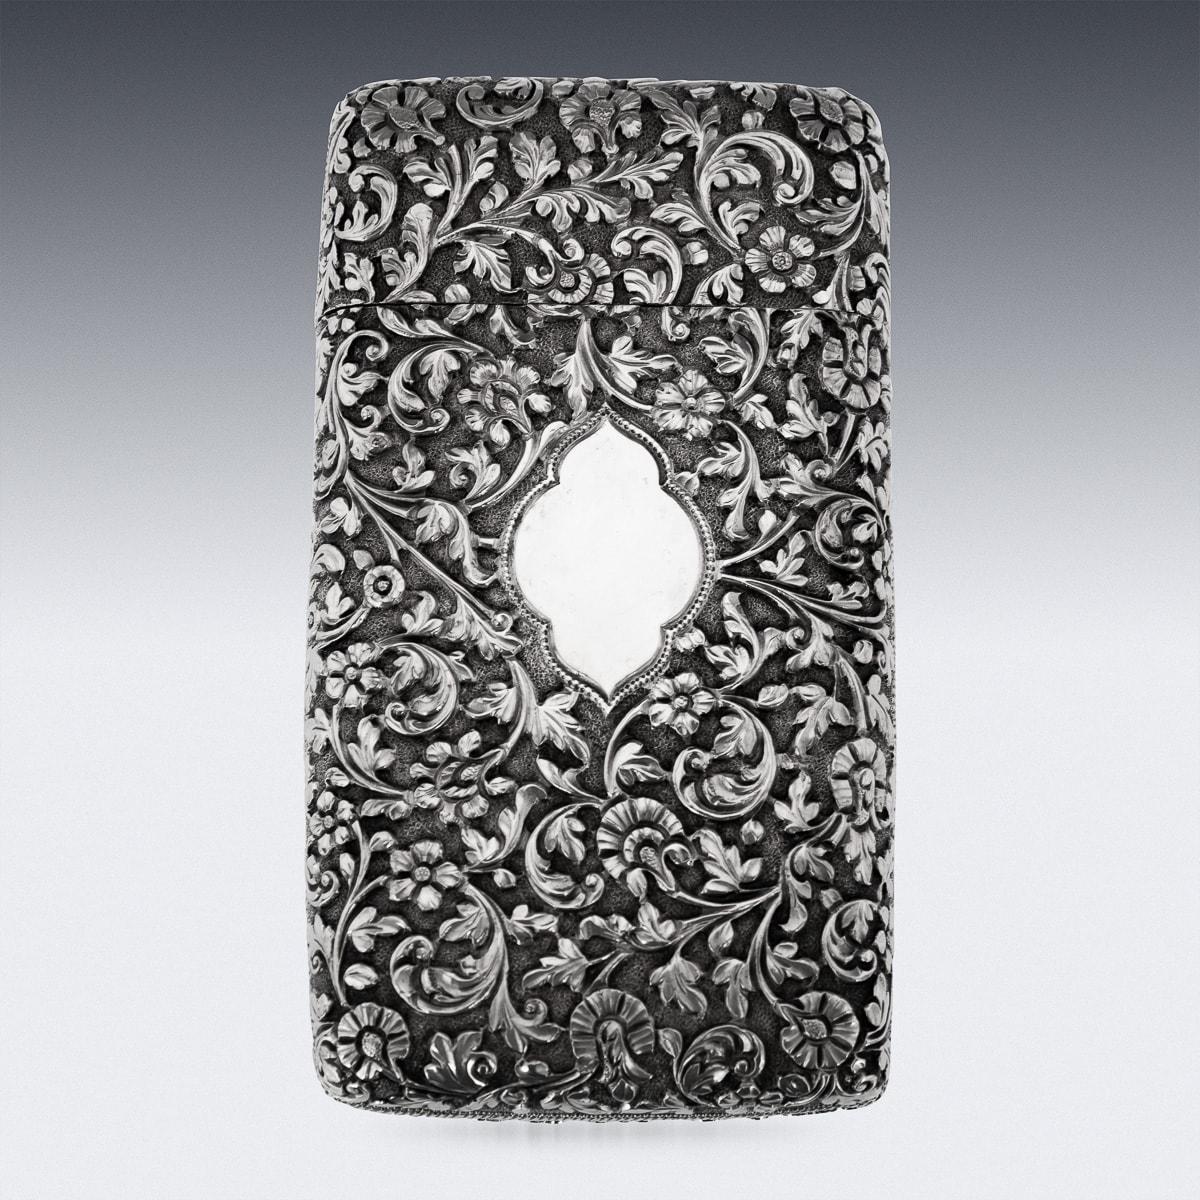 Antique late-19th Century Kutch hand-crafted solid silver cigar case. Of rectangular form with rounded edges, finely chased throughout with scrolling leaves and floral patterns on a finely tooled matted ground. This case is particularly fine